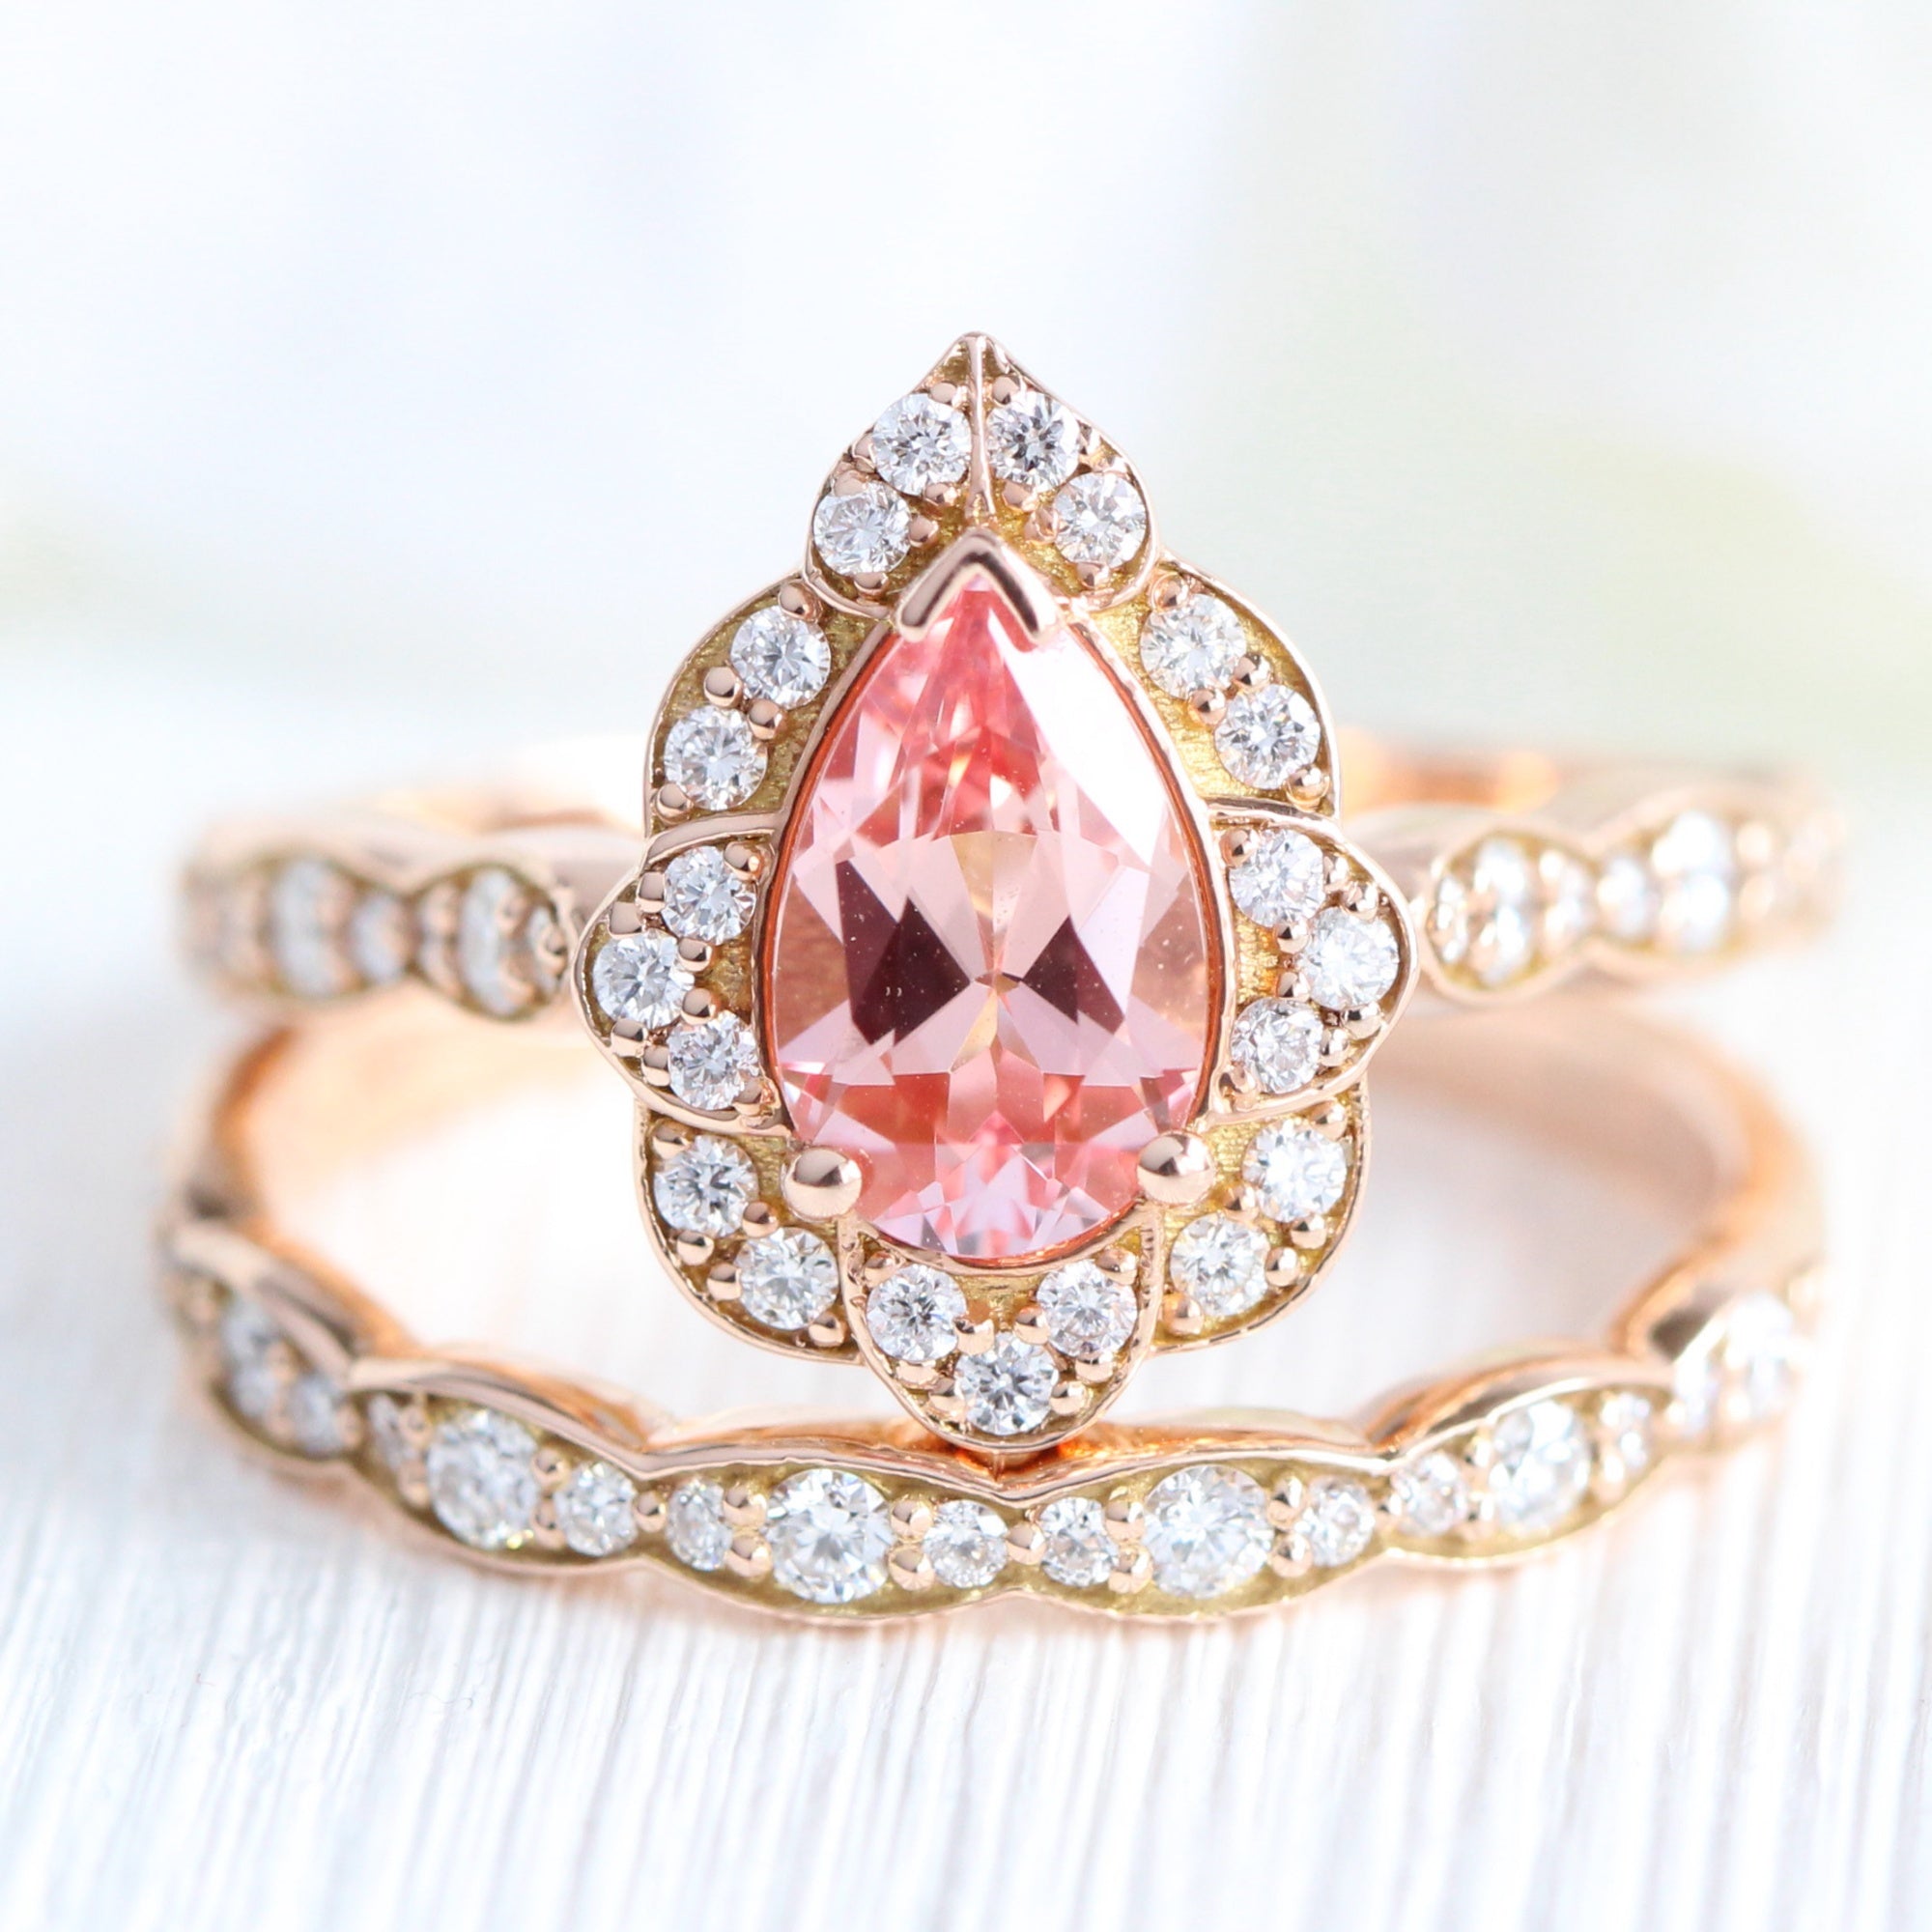 Pear peach sapphire engagement ring rose gold vintage halo diamond ring stack by la more design jewelry